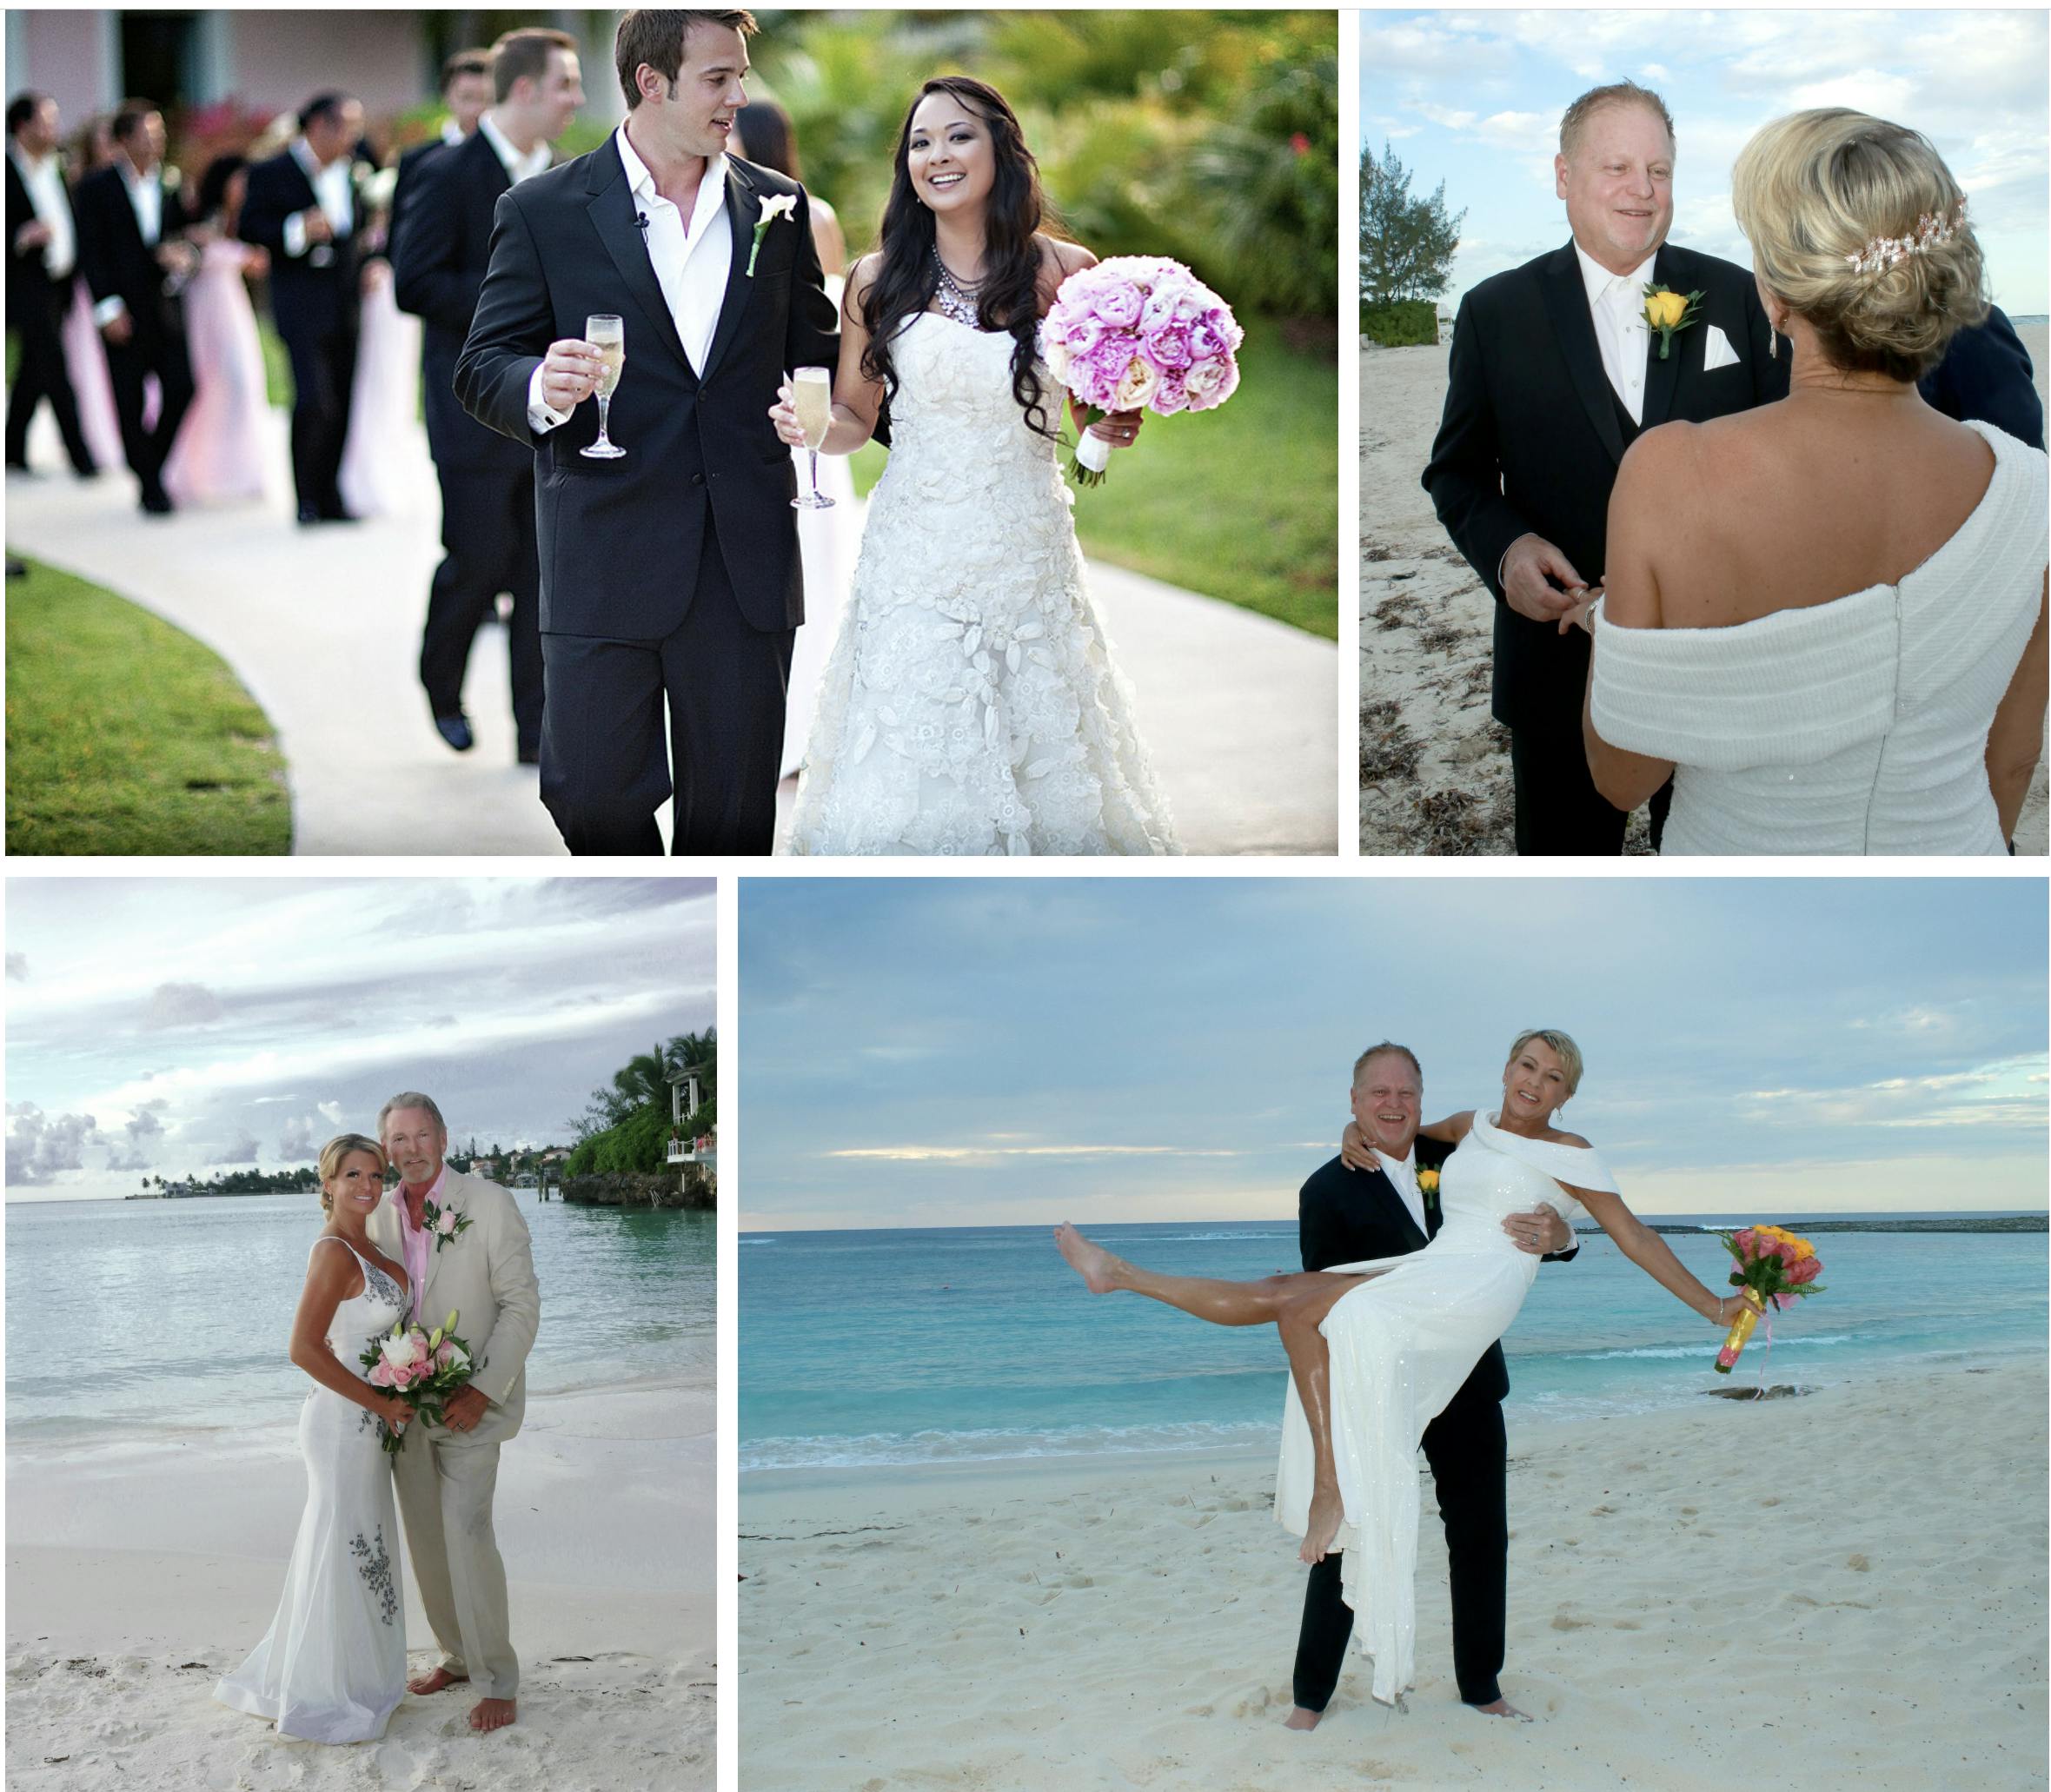 How to Get Married in Nassau Bahamas